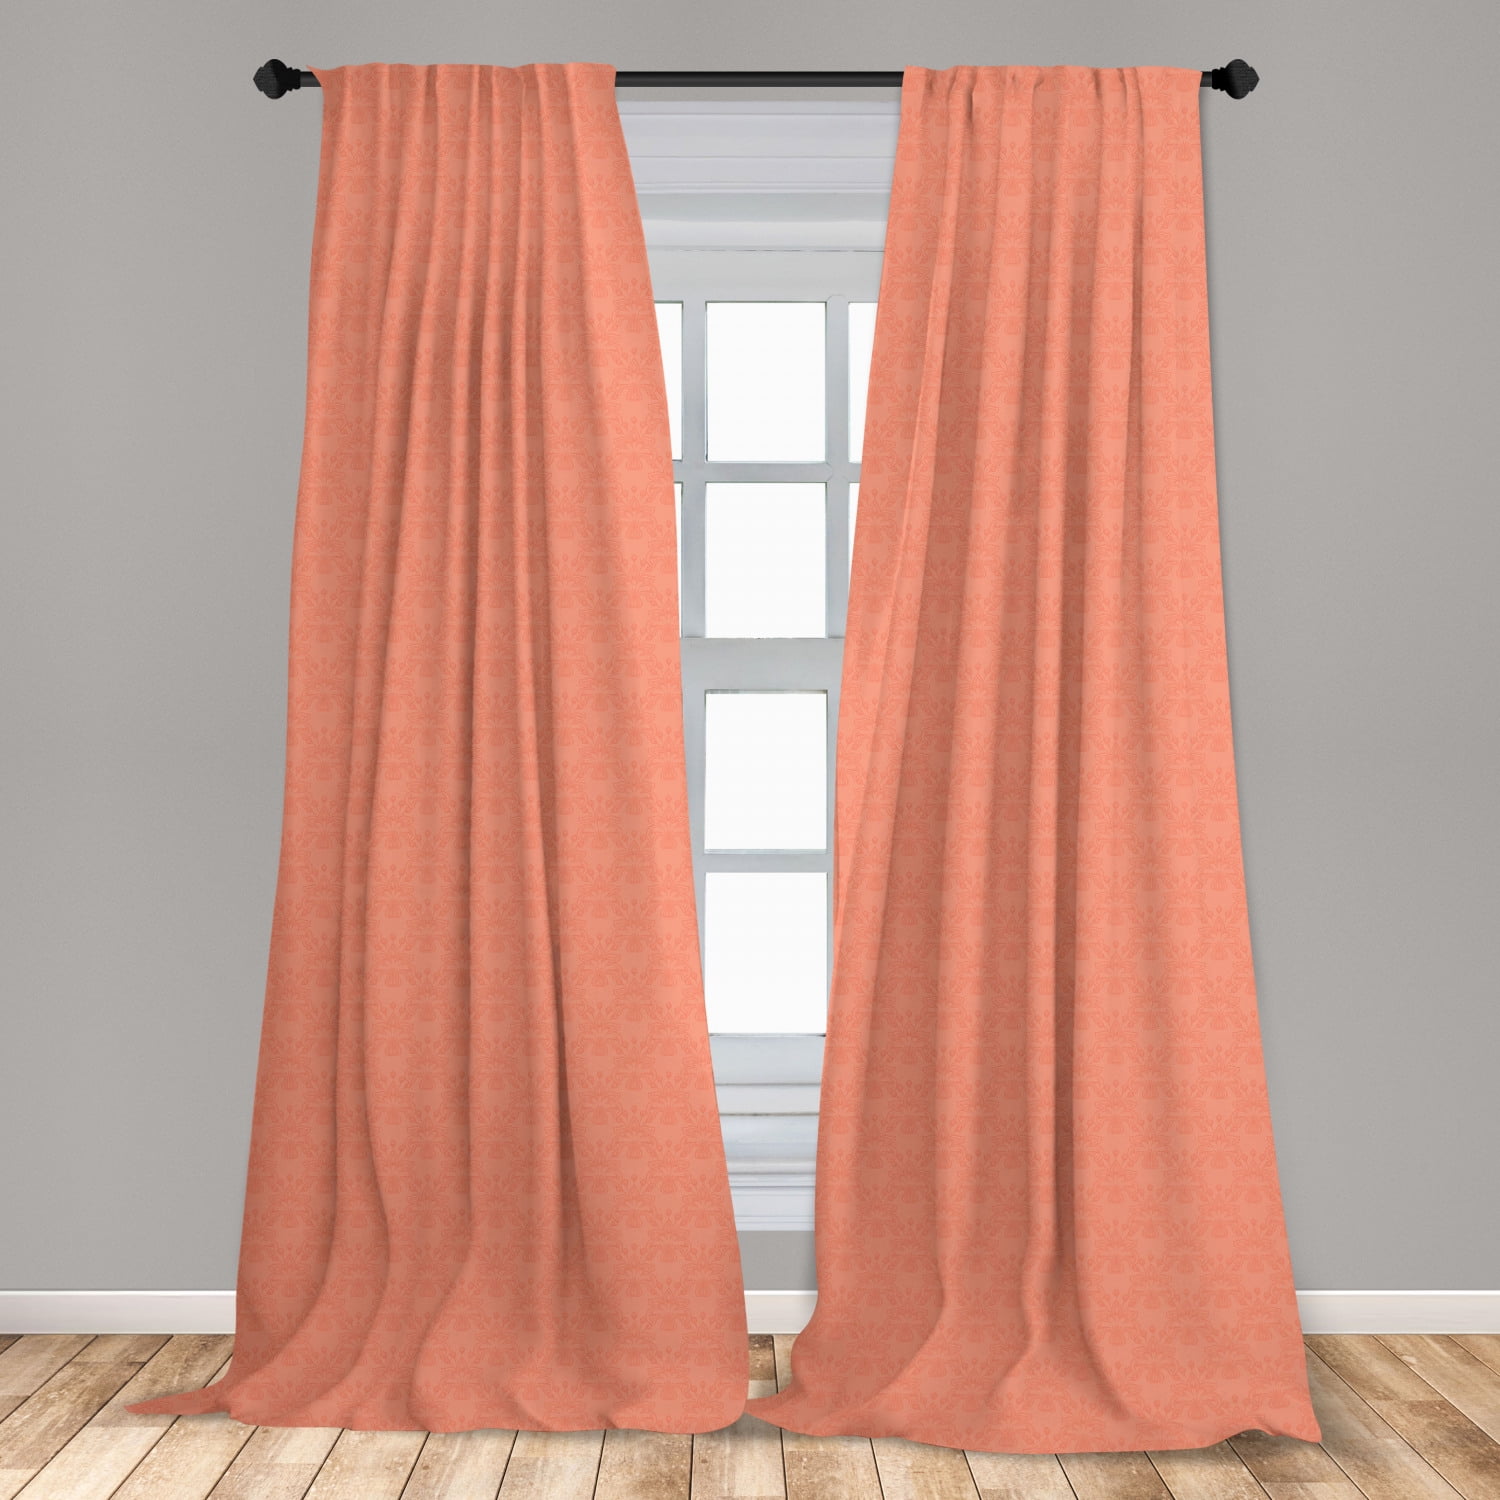 Peach Curtains Floral Vibrant Drawing Window Drapes 2 Panel Set 108x63 Inches 